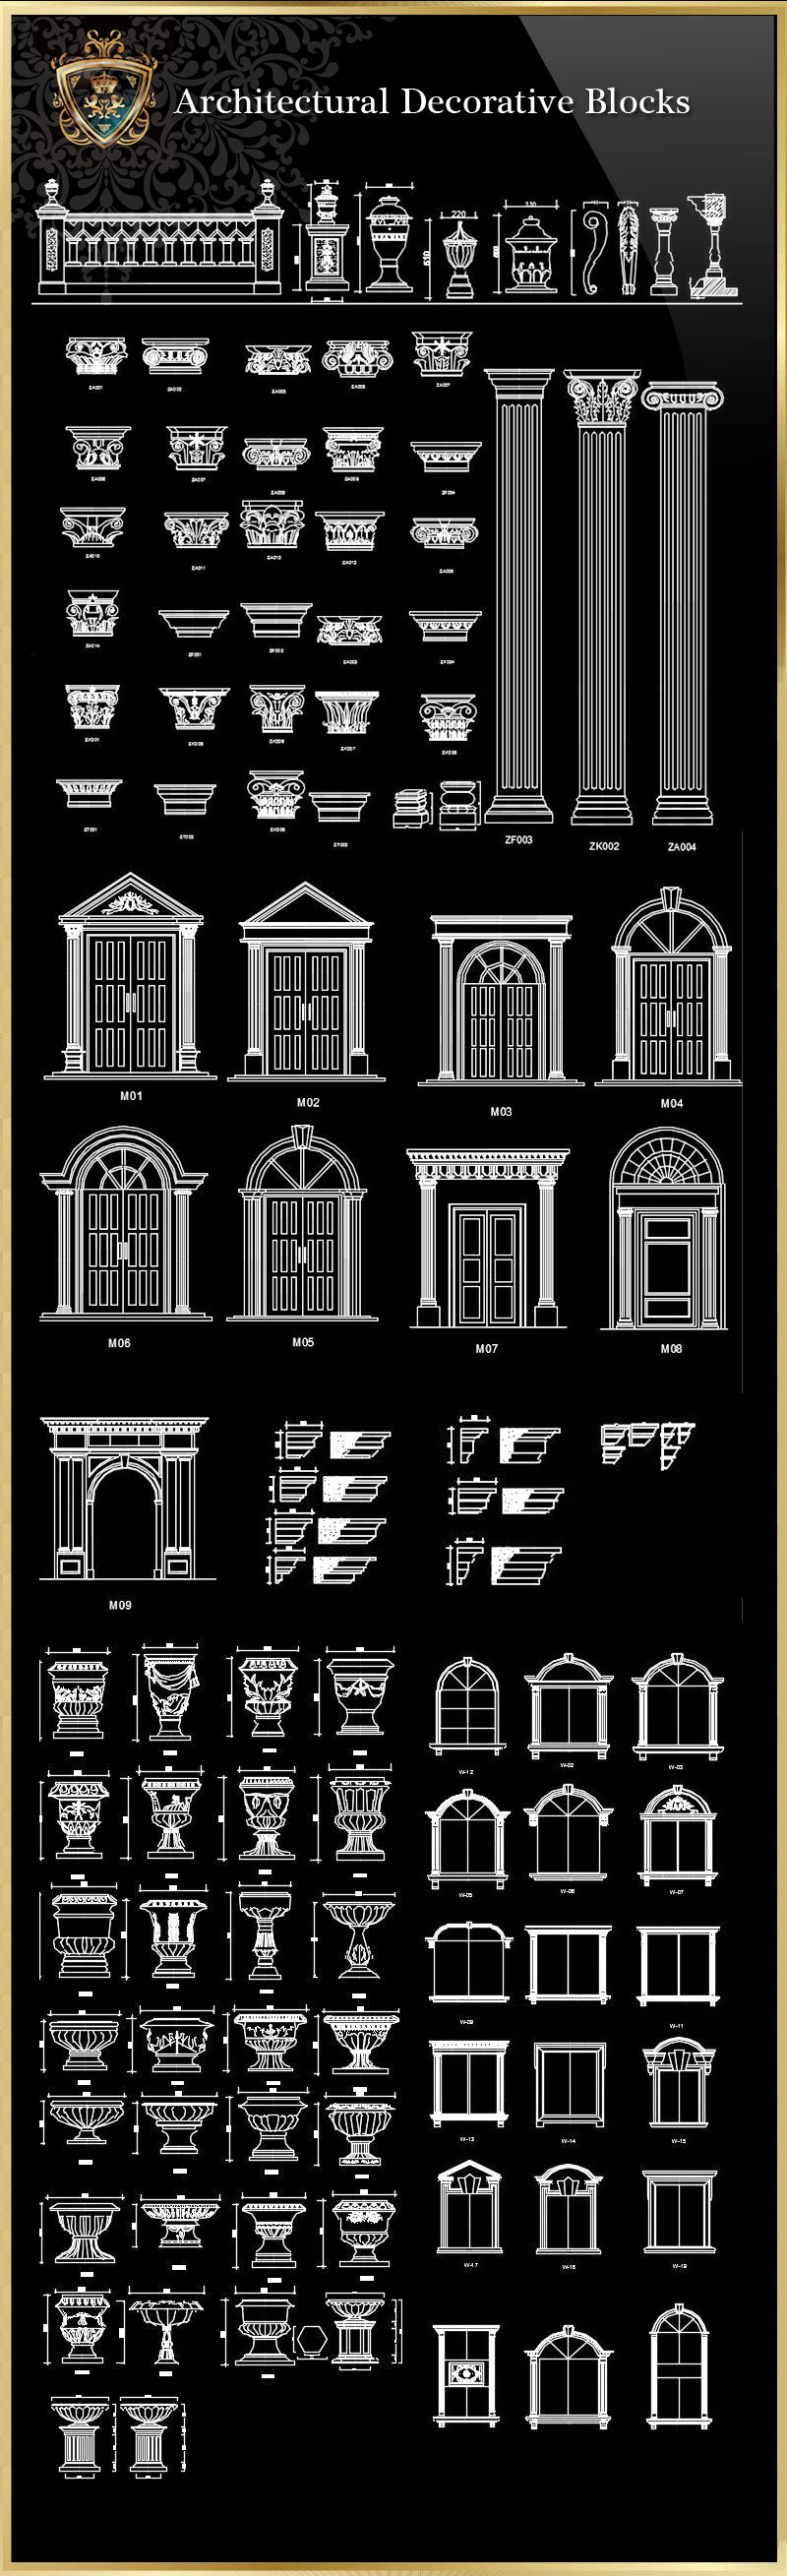 ★【Architectural decorative blocks】Luxury home, Luxury Villas, Luxury Palace, Architecture Ornamental Parts, Decorative Inserts & Accessories, Handrail & Stairway Parts, Outdoor House Accessories, Euro Architectural Components, Arcade